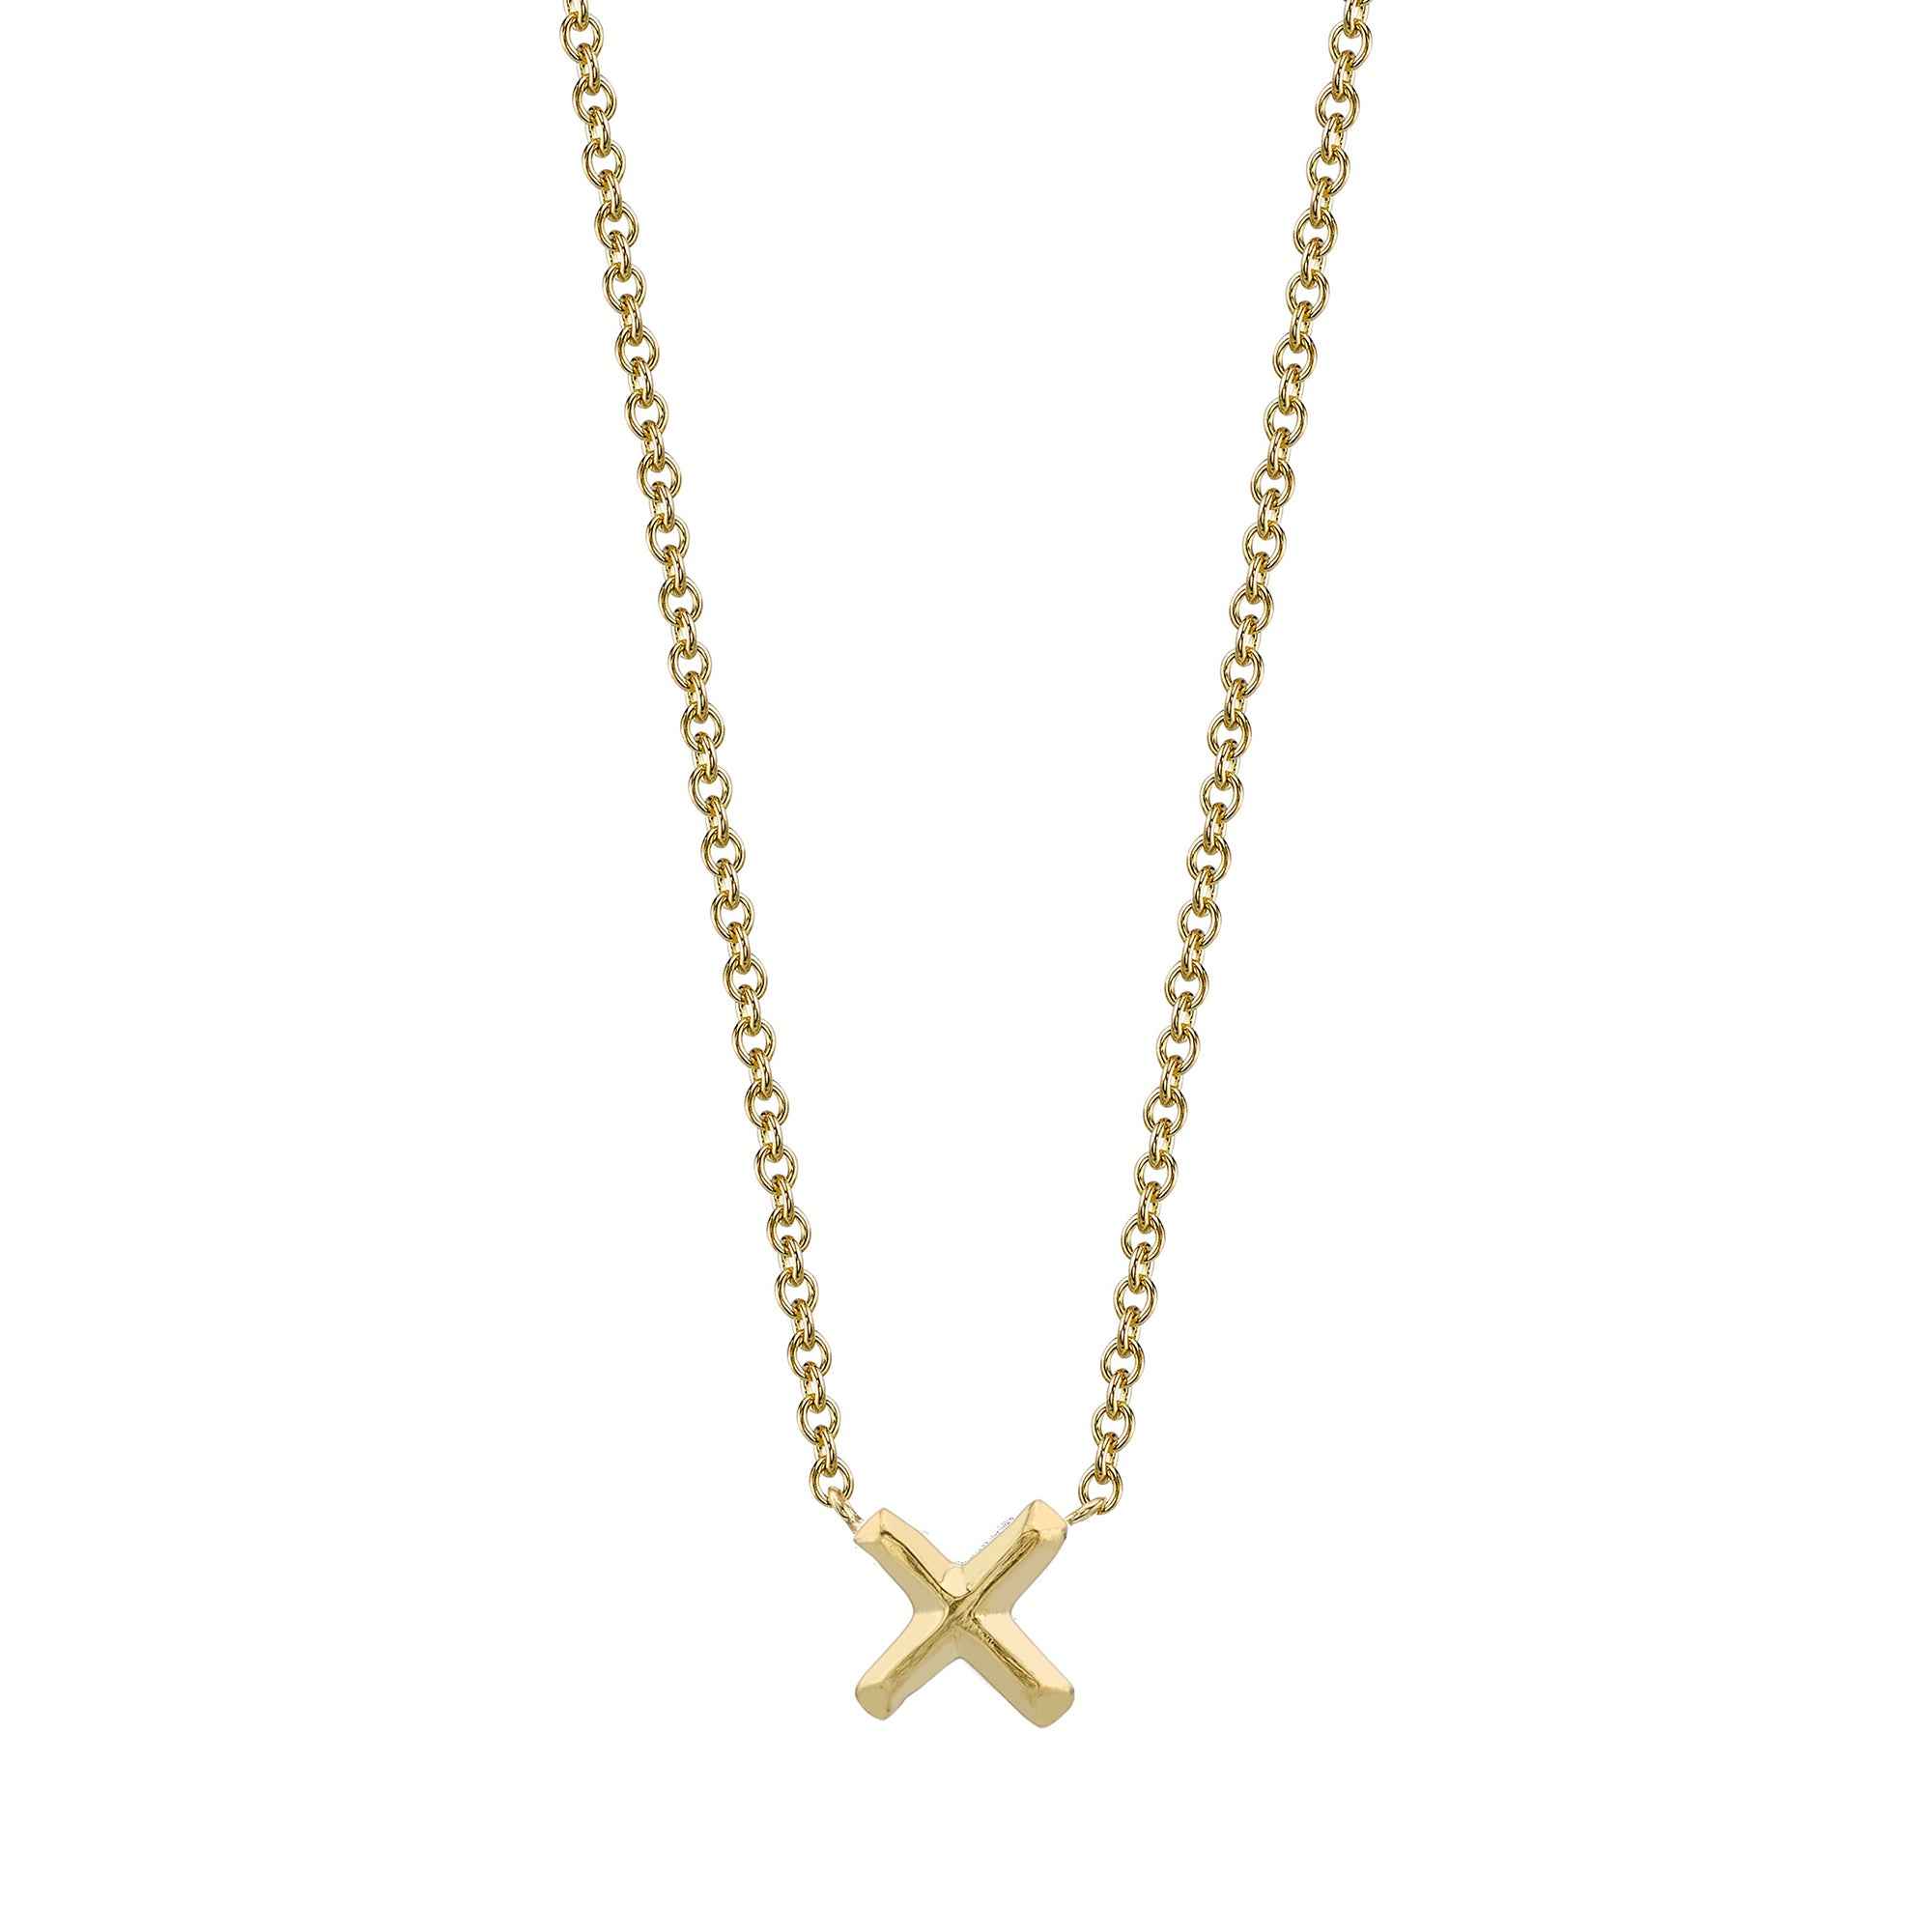 Lizzie Mandler X Necklace - Yellow Gold - Necklaces - Broken English ...